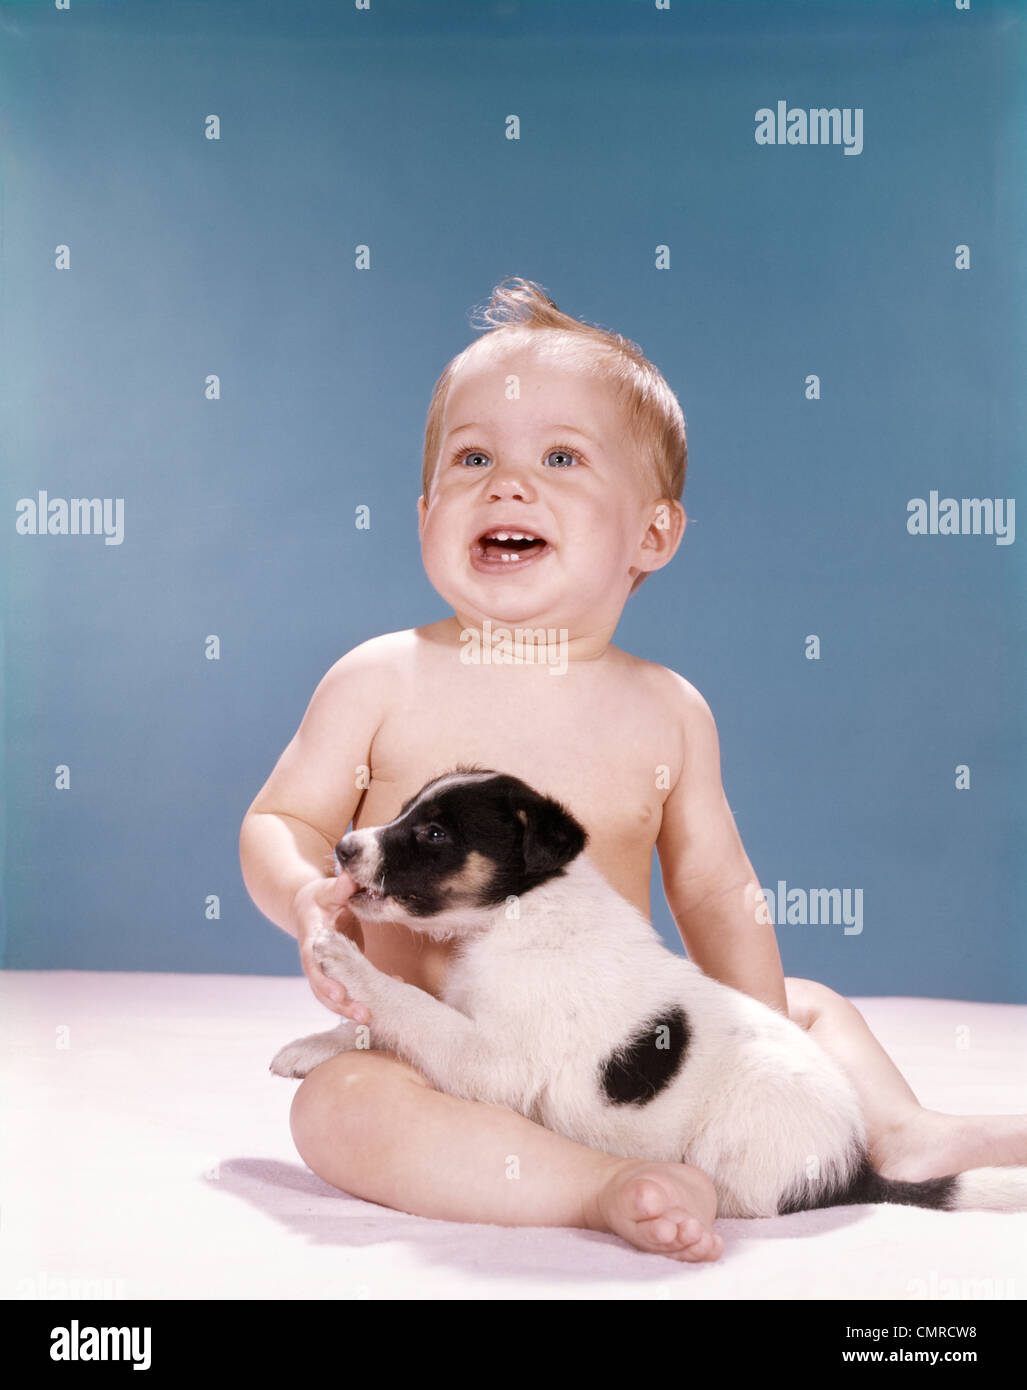 1960s SMILING BABY GIRL SITTING IN DIAPERS PLAYING WITH YOUNG BLACK AND WHITE PUPPY DOG Stock Photo